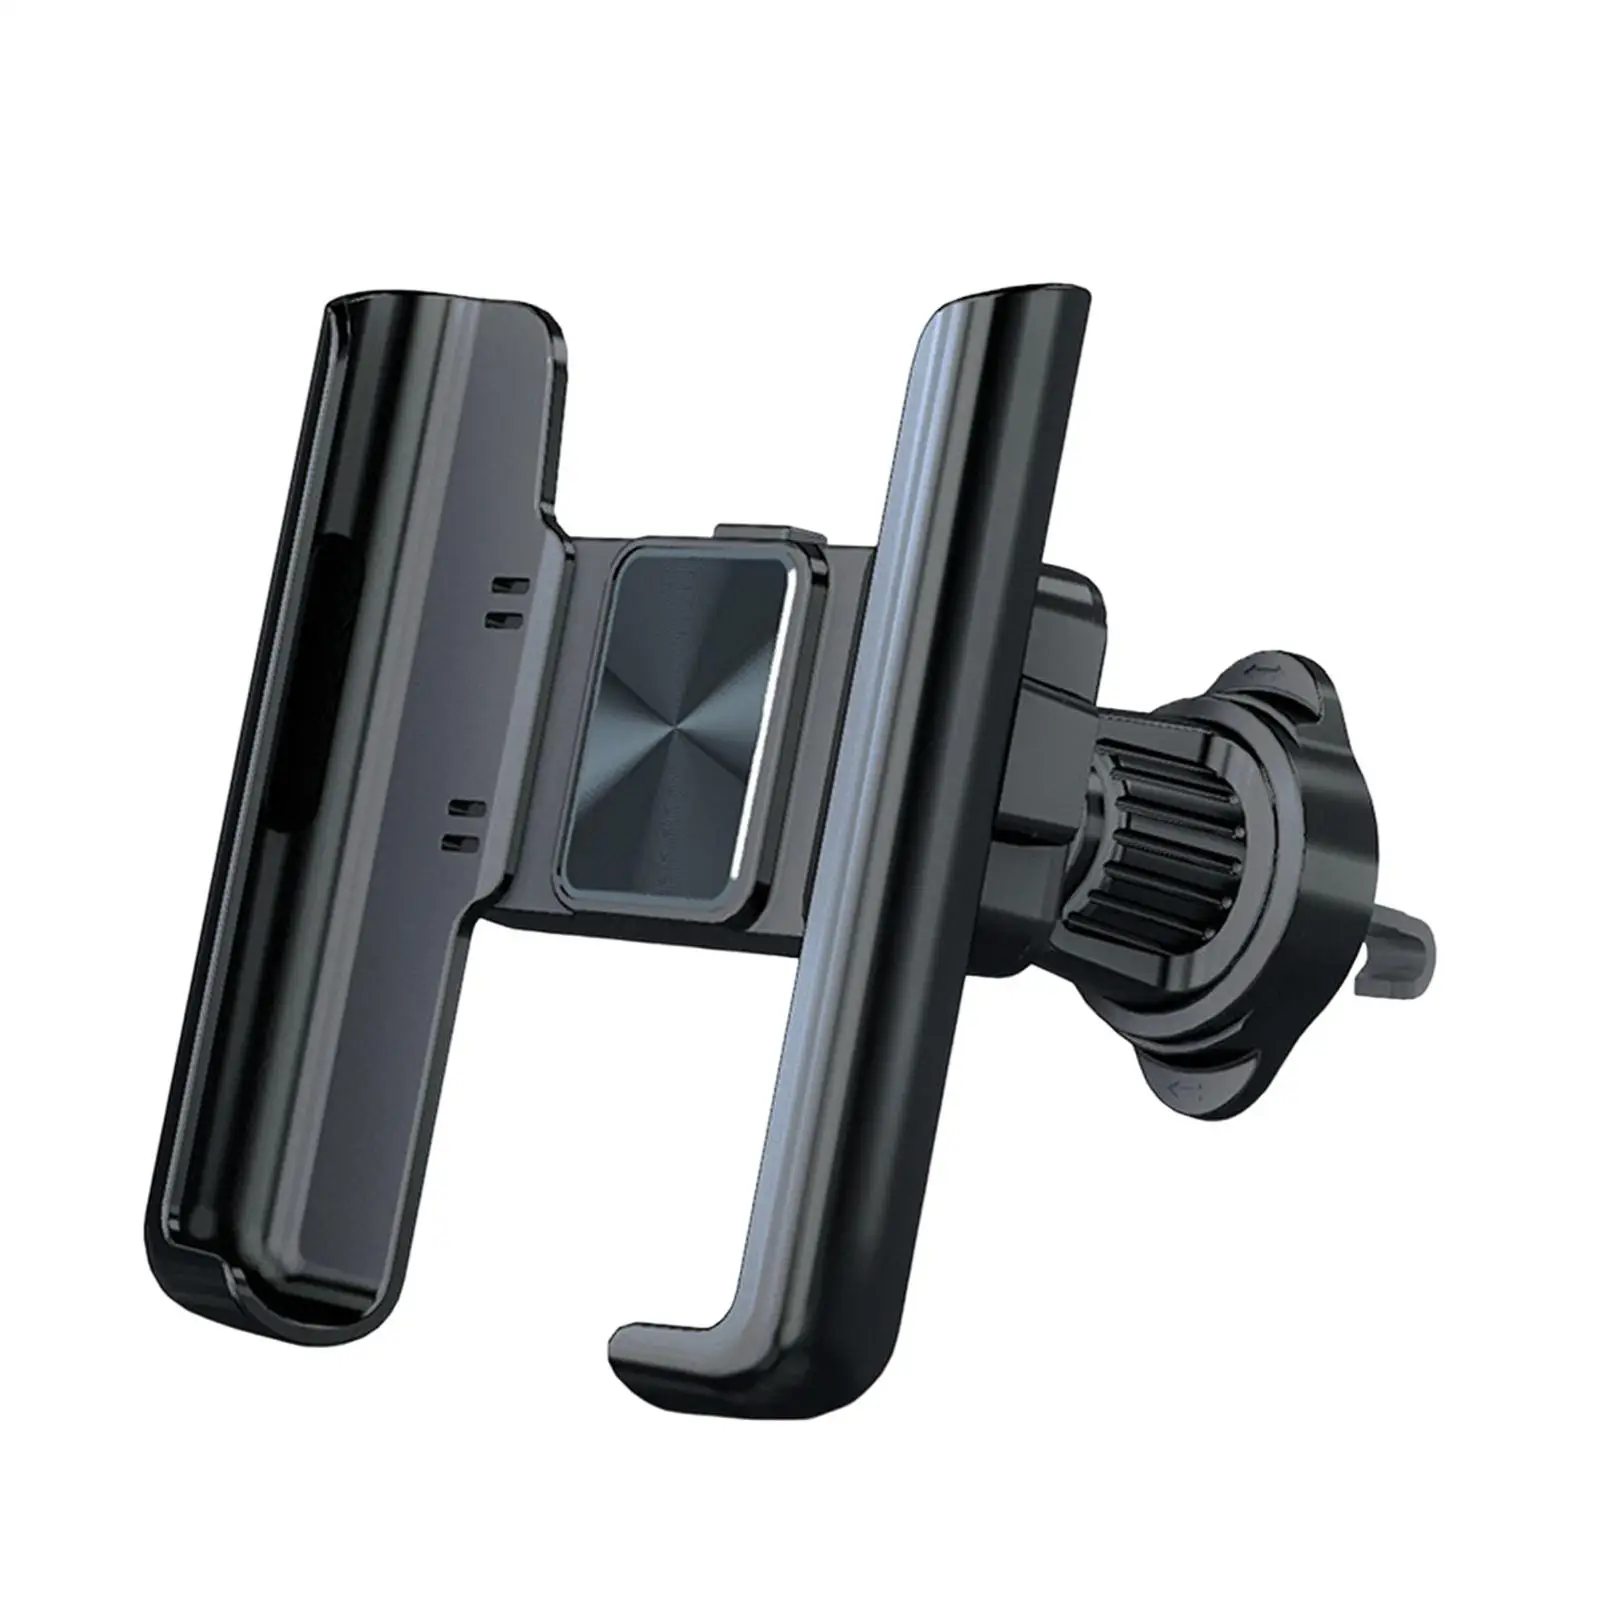 Air Vent Car Smartphone Holder 360 Rotatable for Most Phones Durable Adjustable Angle Auto Support Bracket for Trucks SUV